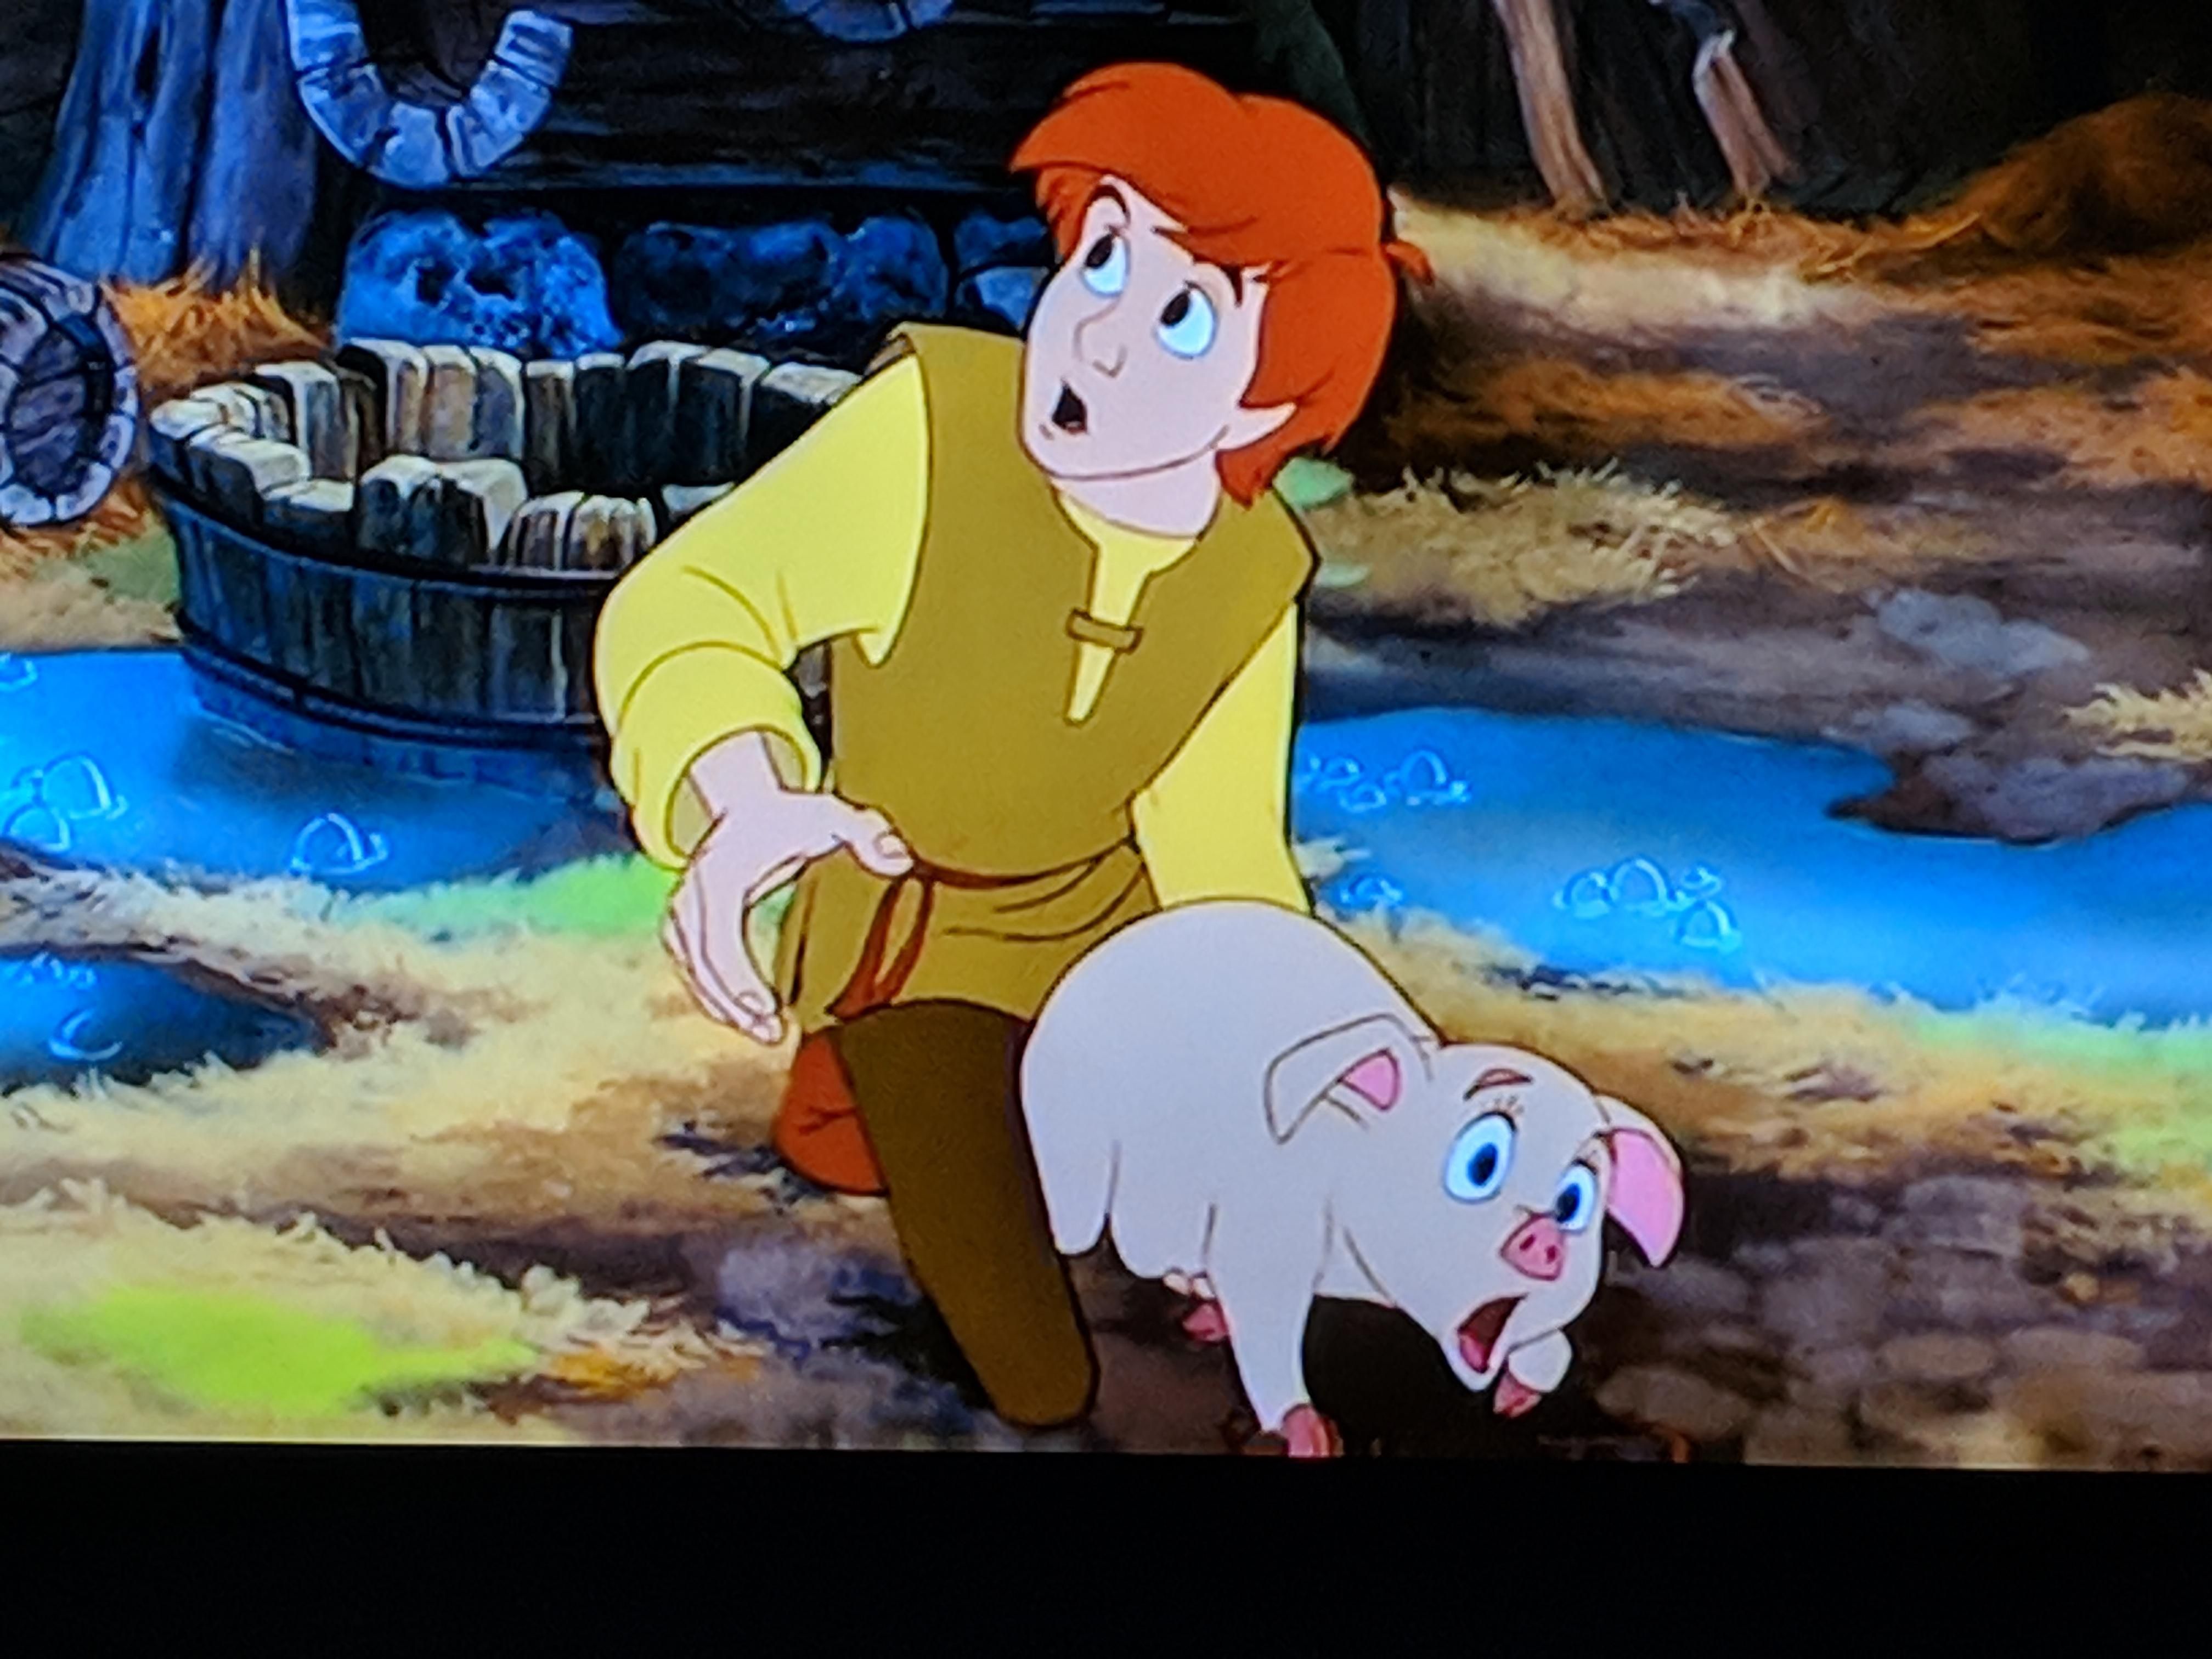 Saw a post earlier about never pausing a Disney movie, reminded me of this gem. From the Black Cauldron.